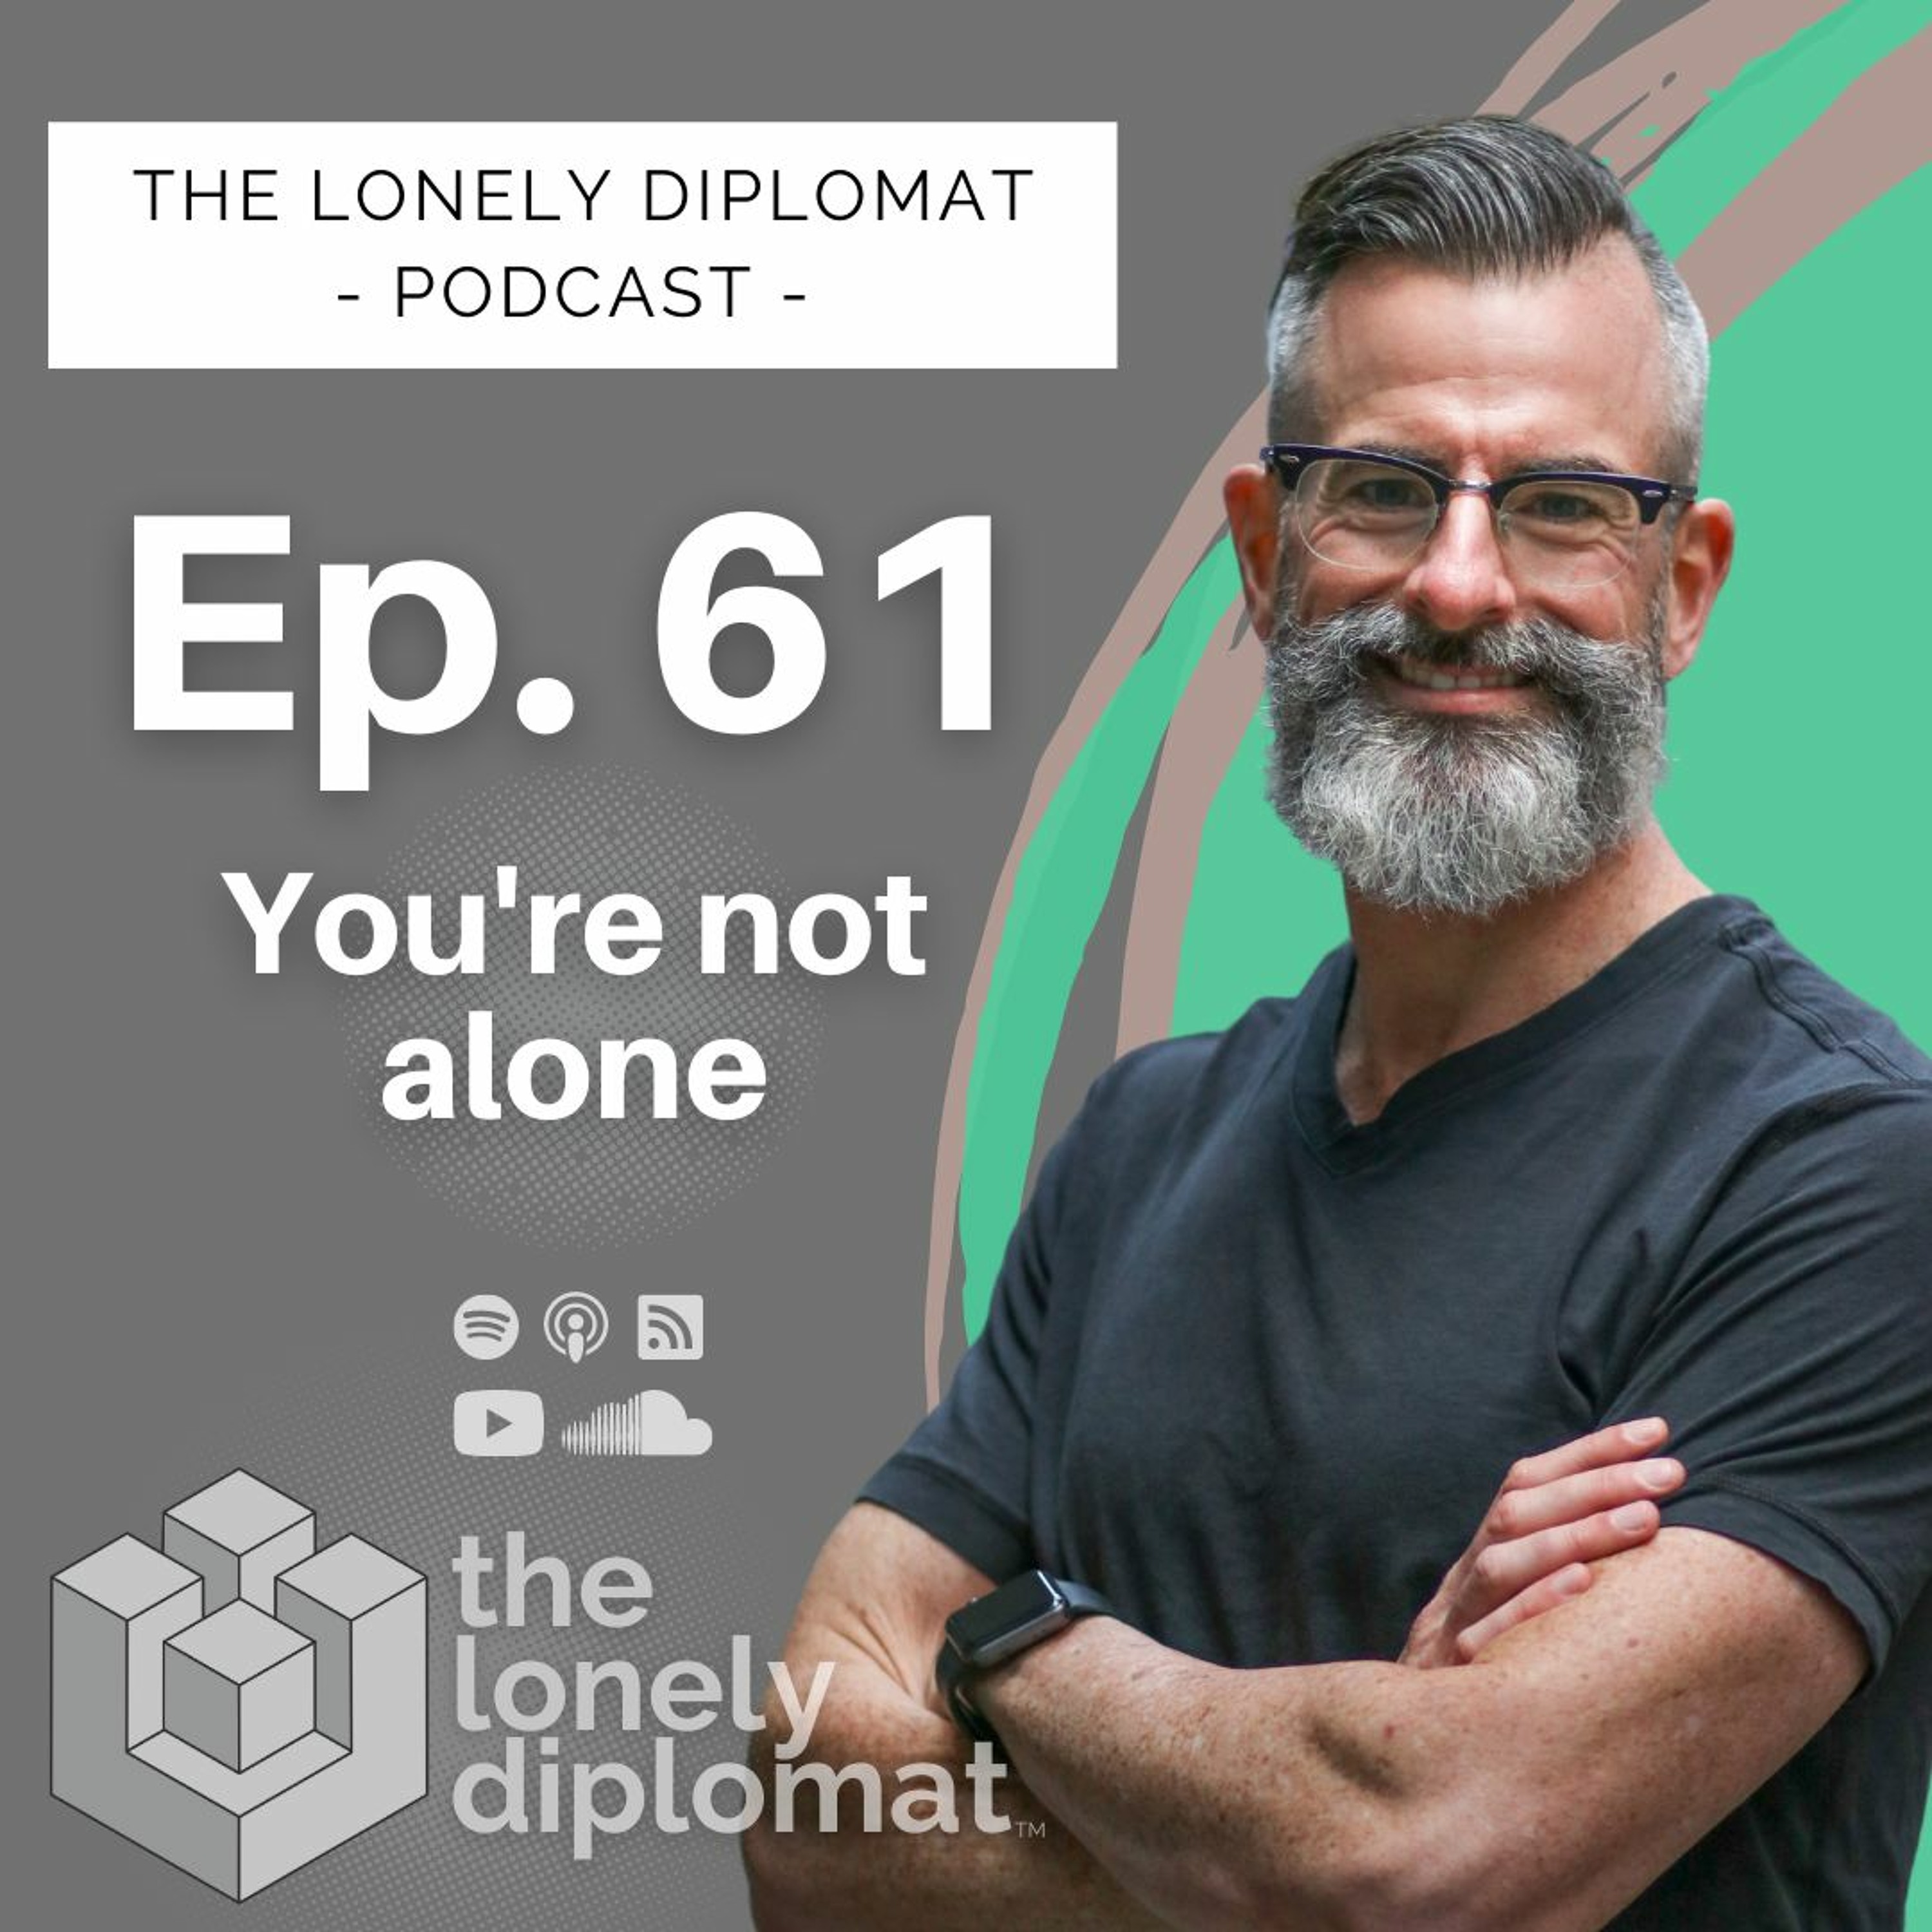 Ep. 61 - You're not alone